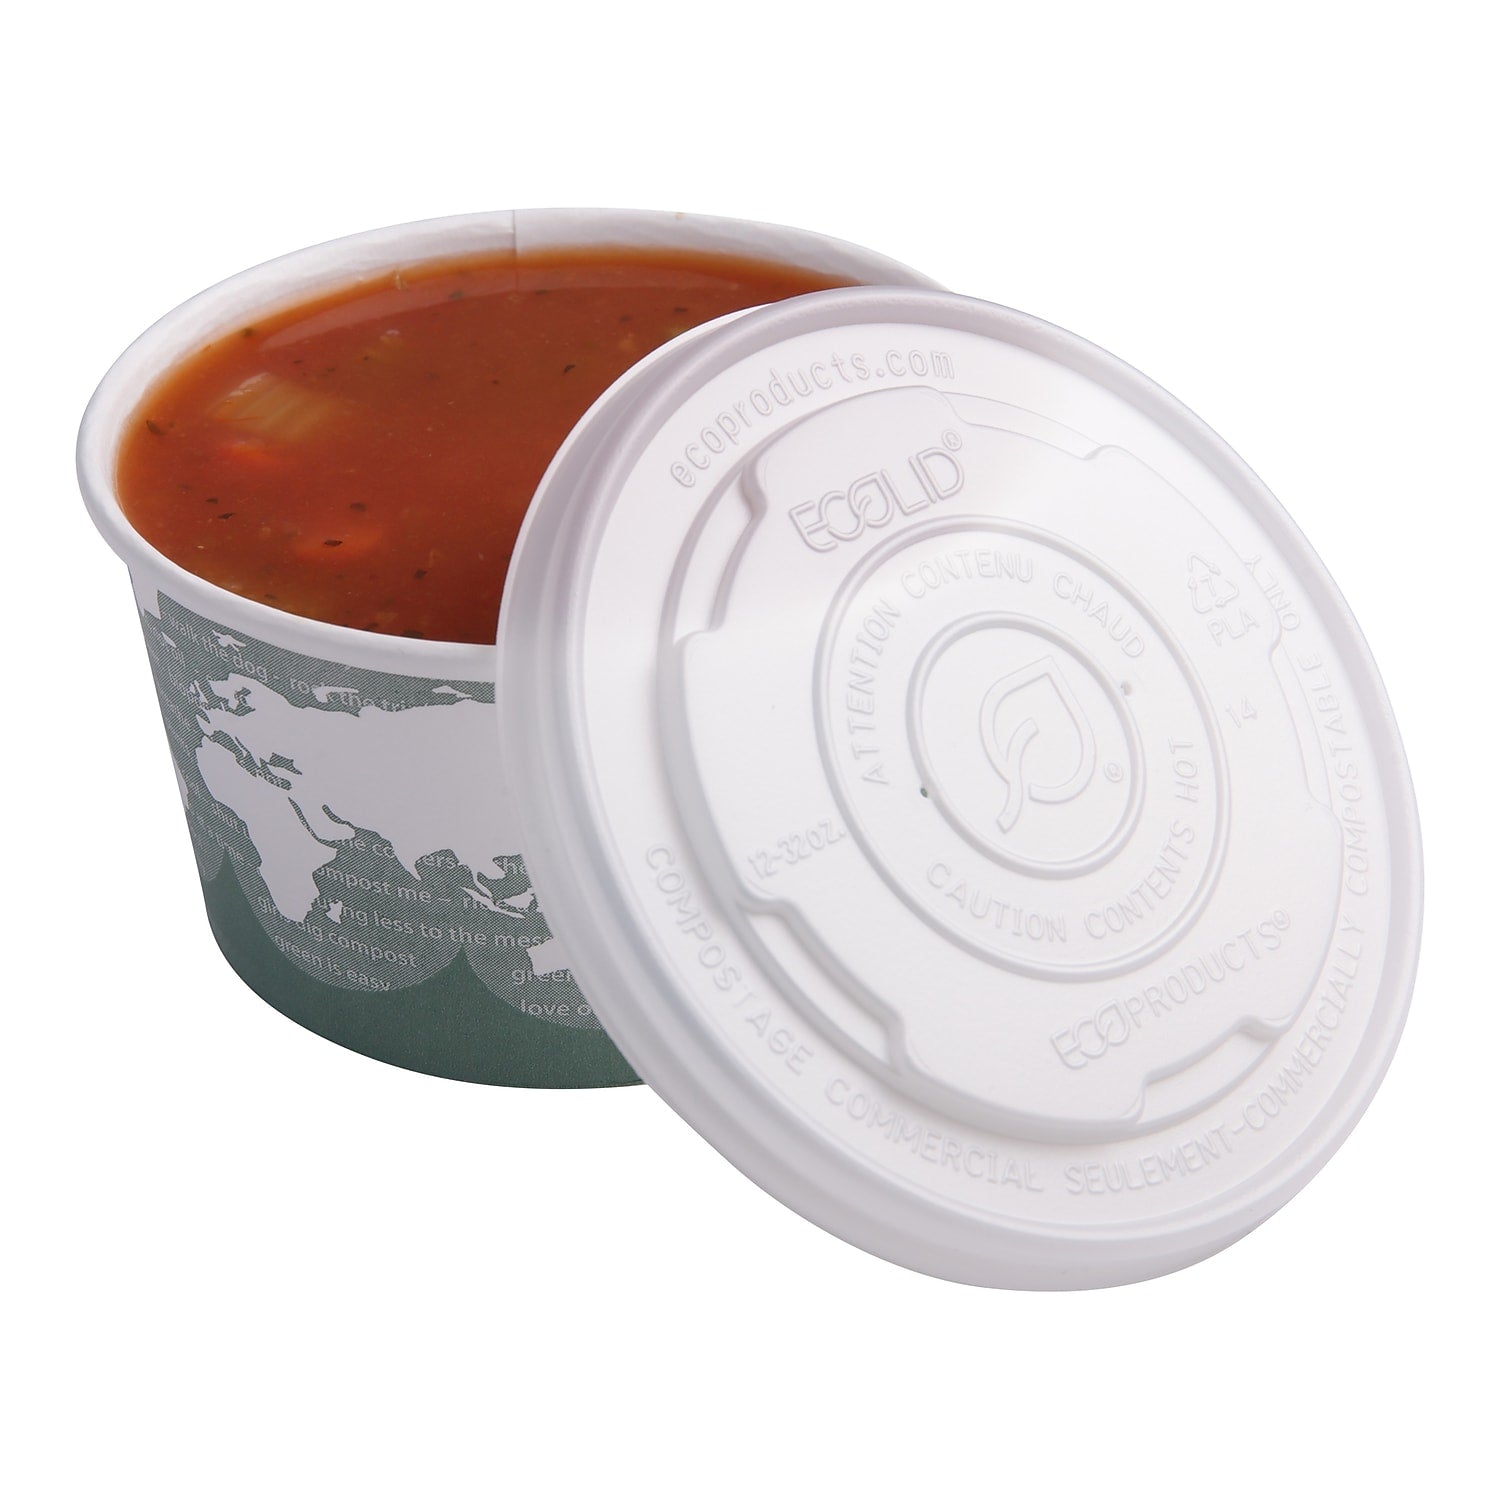 CPLA lid for soup container - 50 pcs